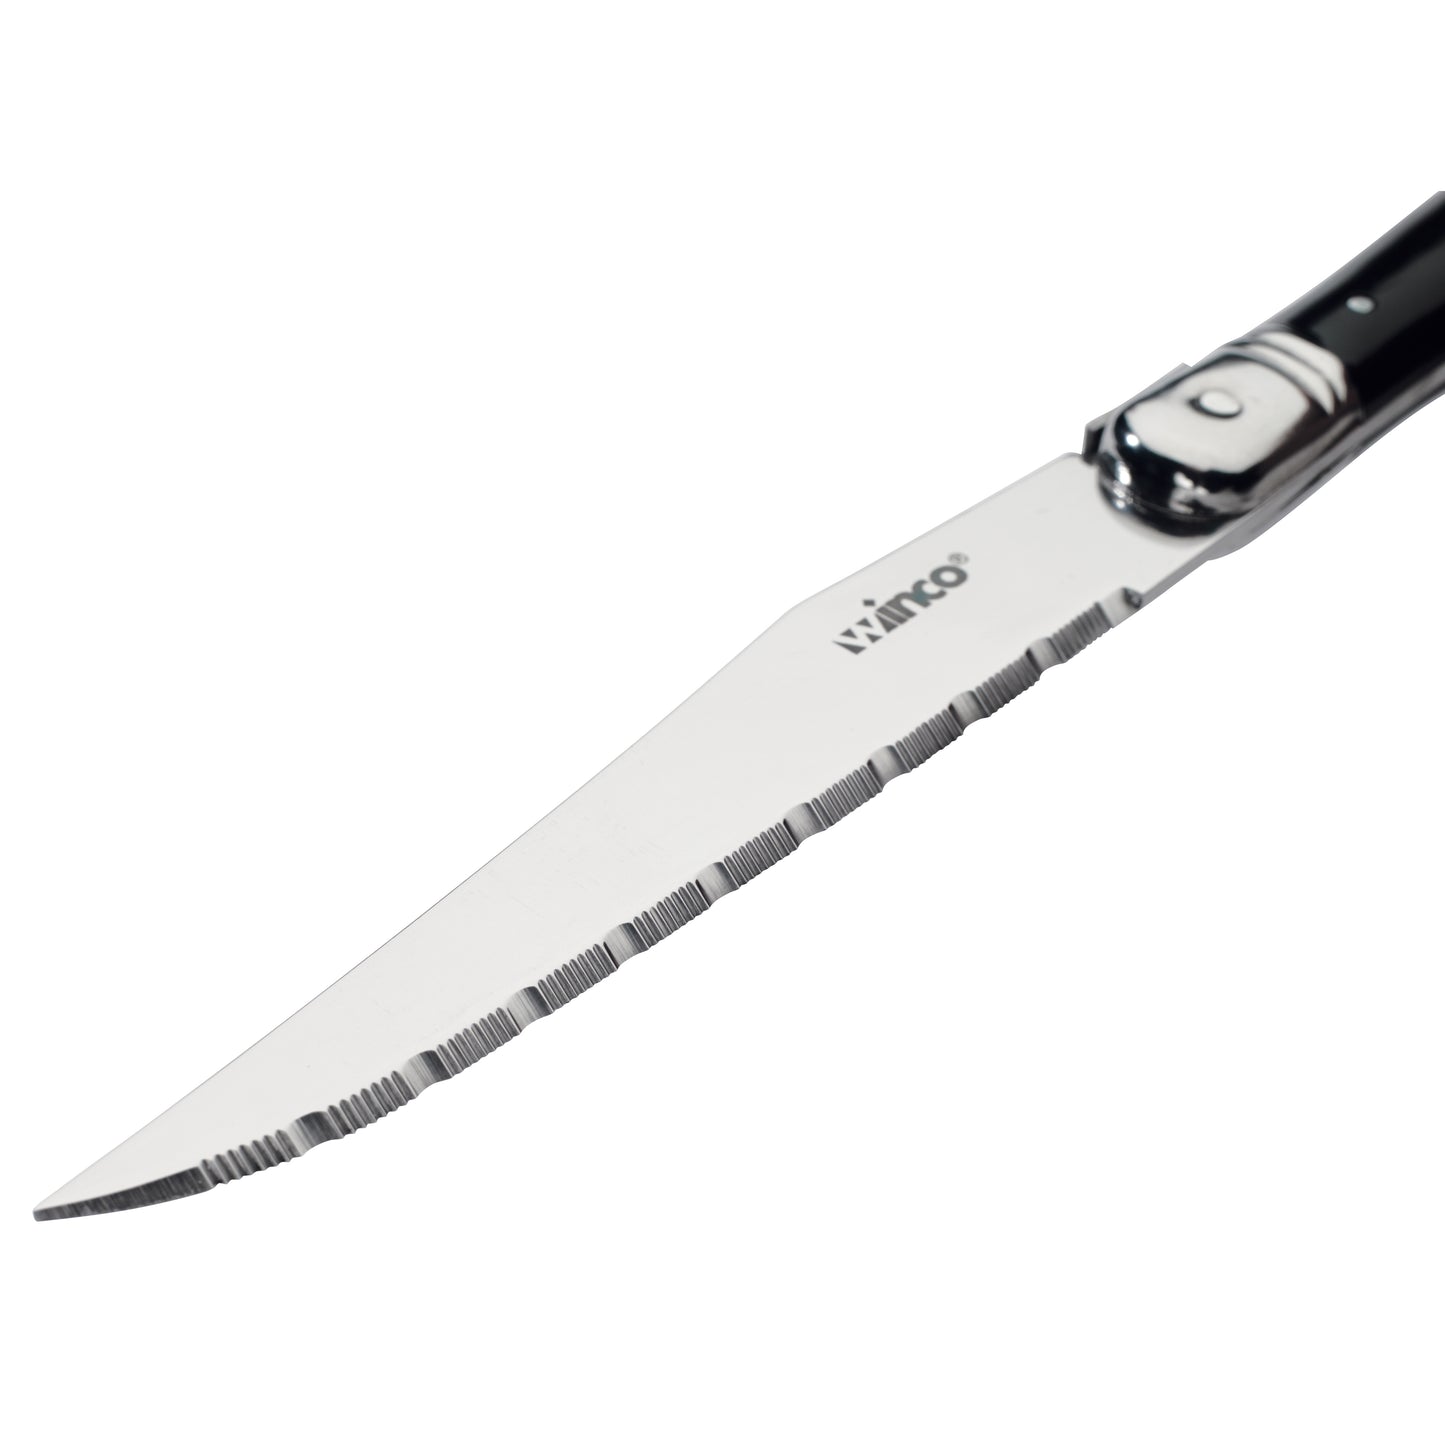 K-73PC - Euro Slim Steak Knives, 4-3/4" Blade with Pointed Tip